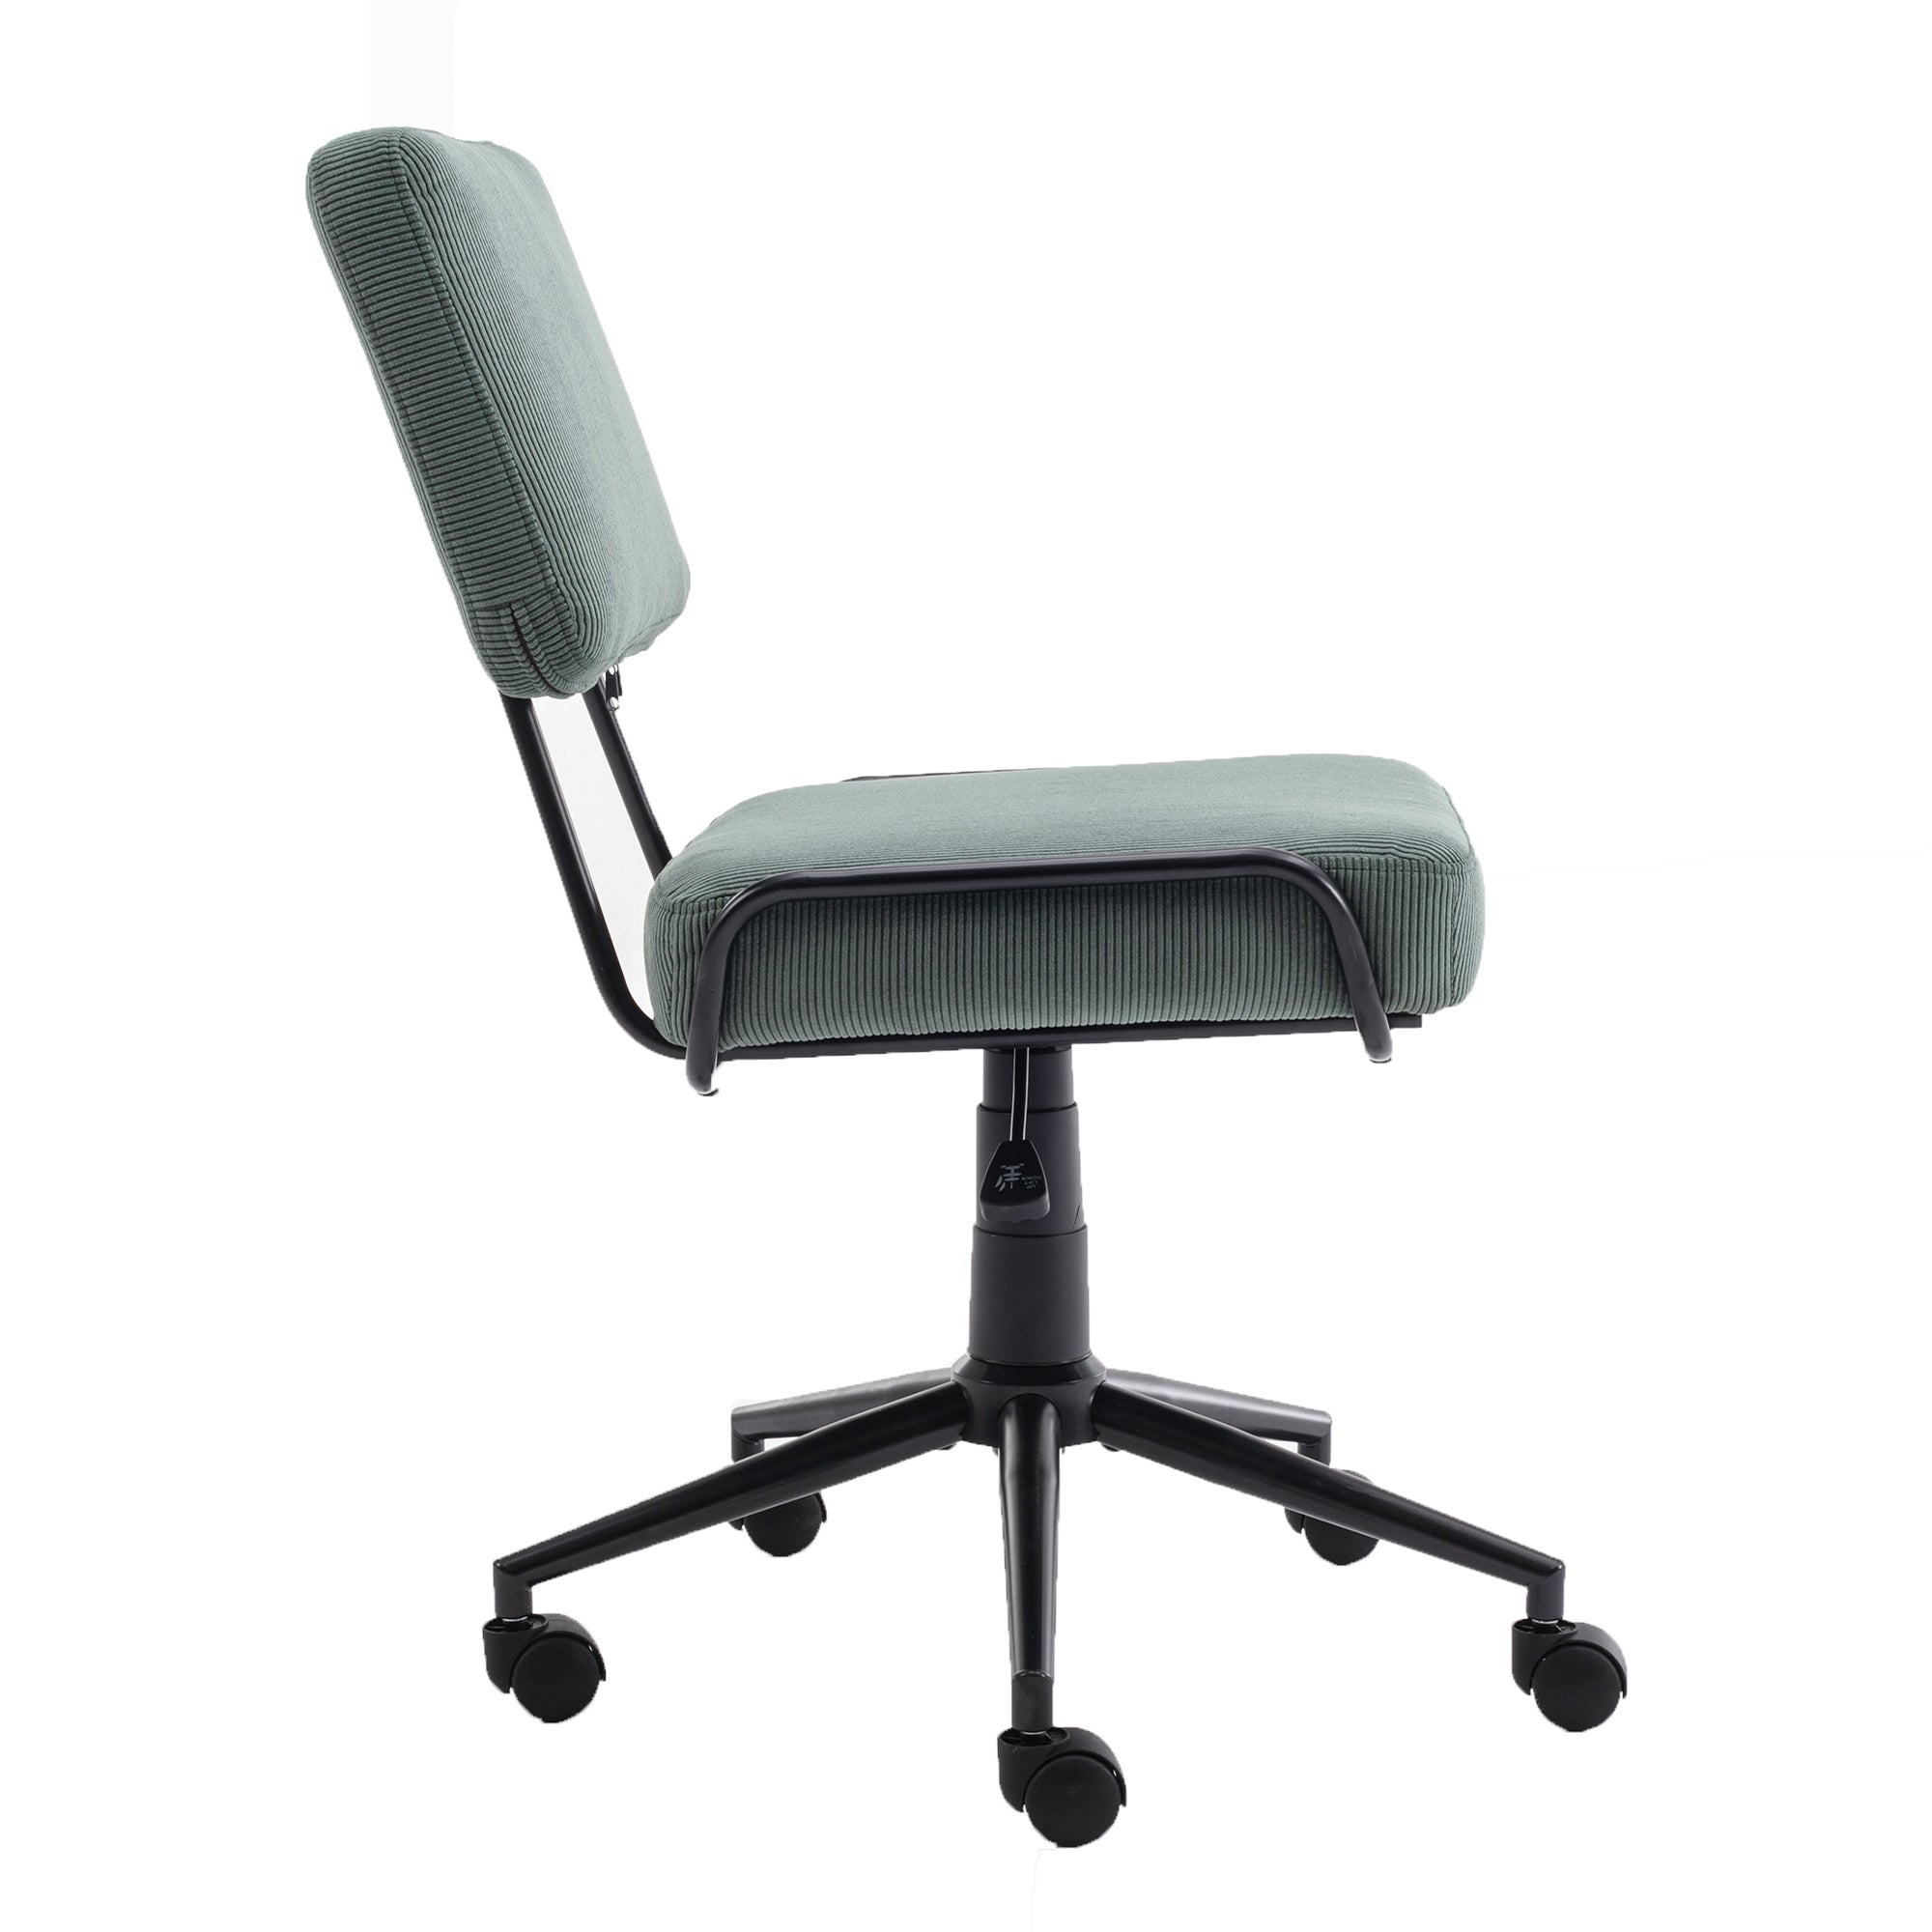 Corduroy Desk Chair Home Office Adjustable Height - Green